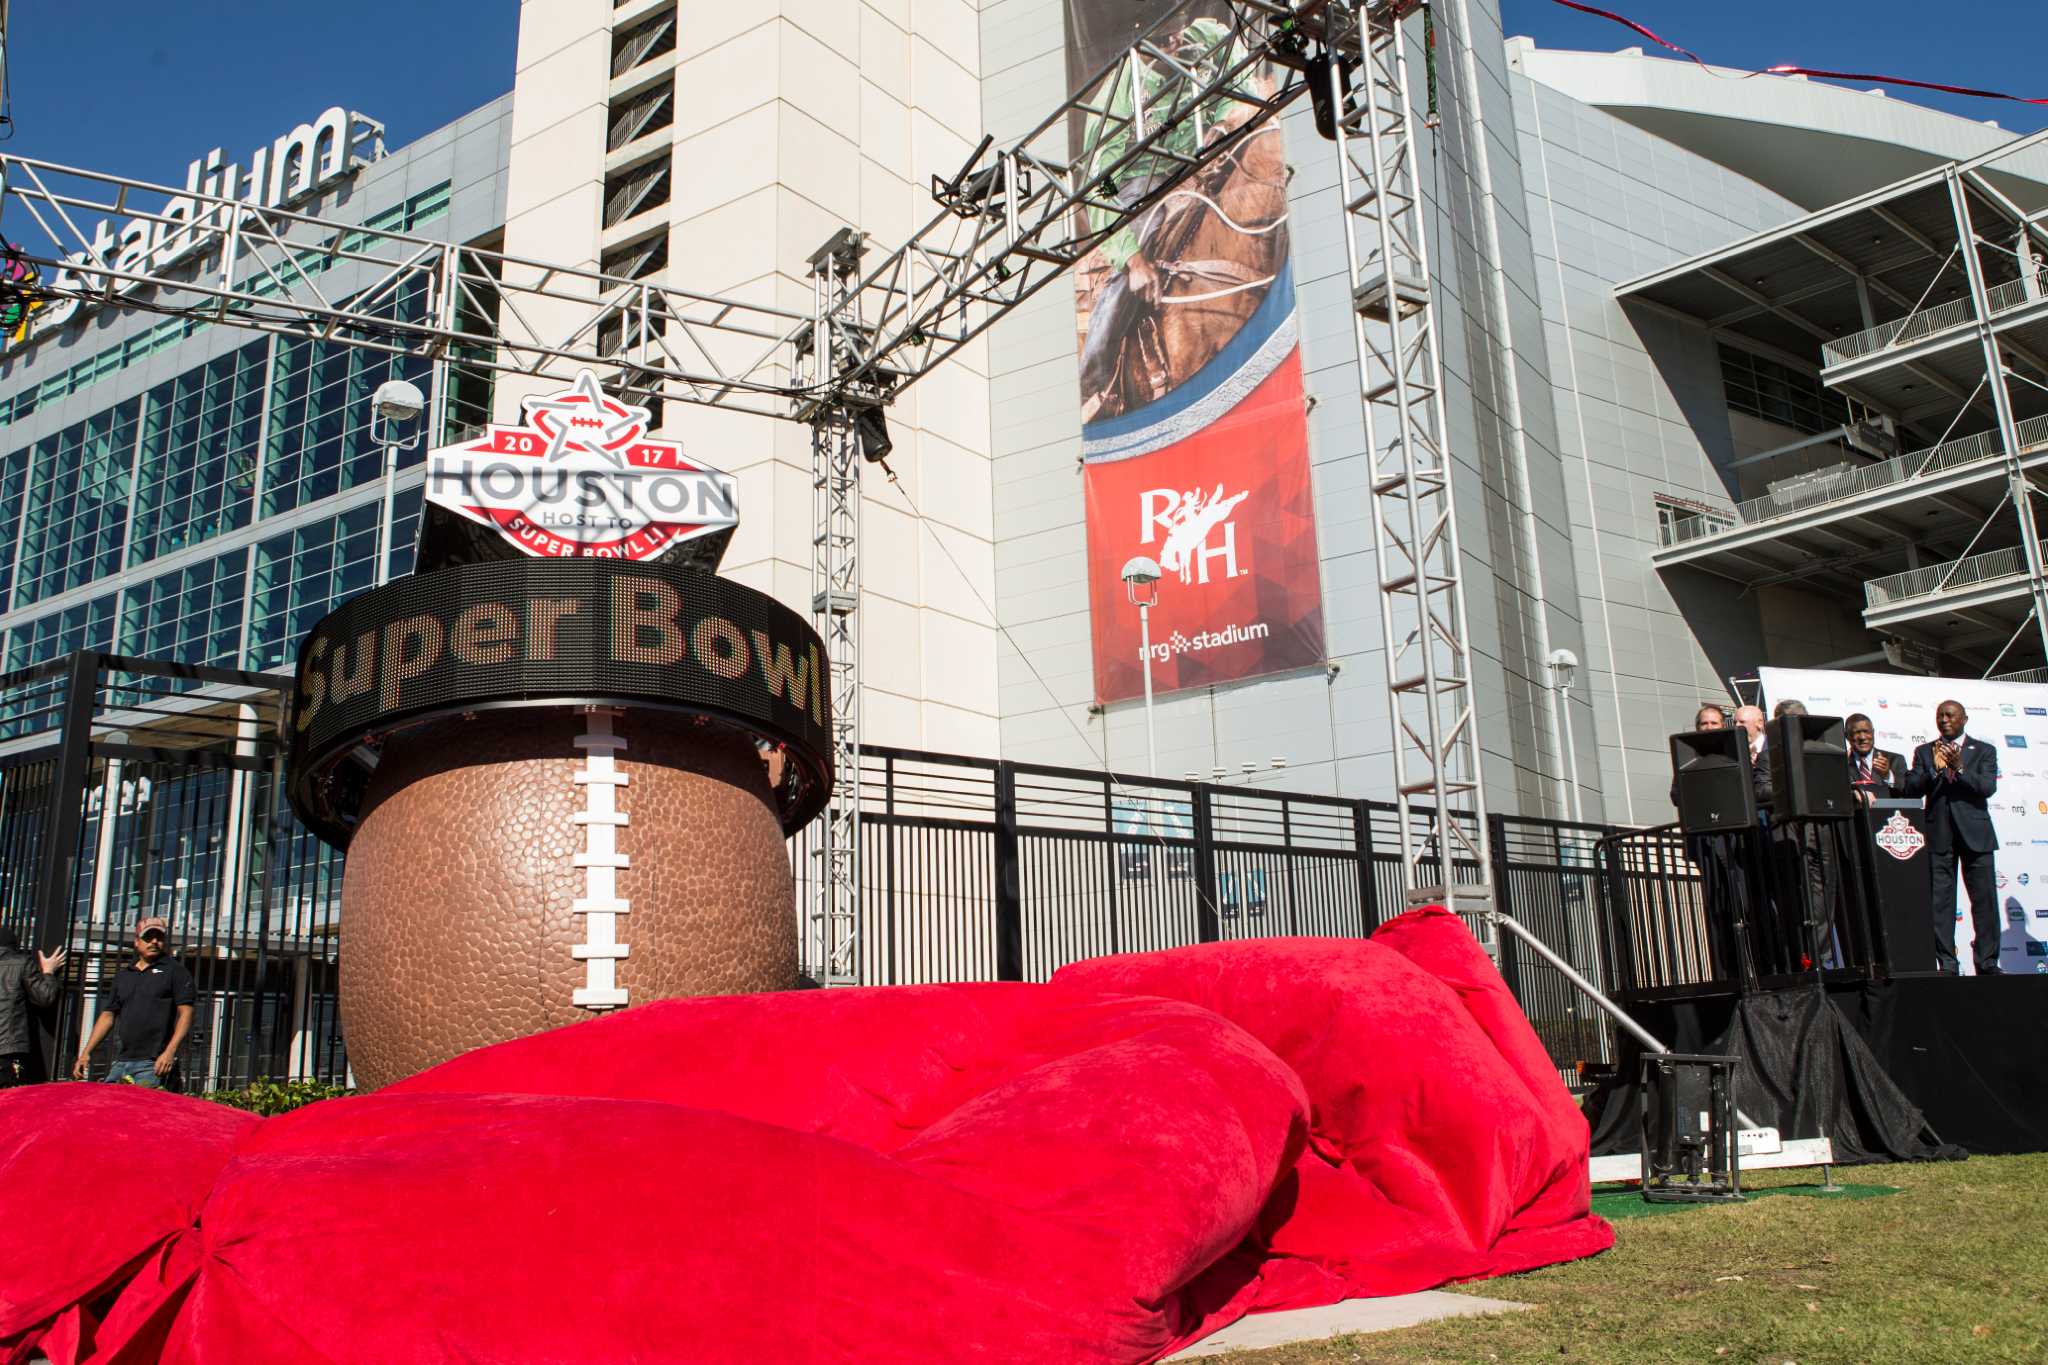 Tickets for Super Bowl's NFL Experience go on sale Wednesday - Houston Chronicle